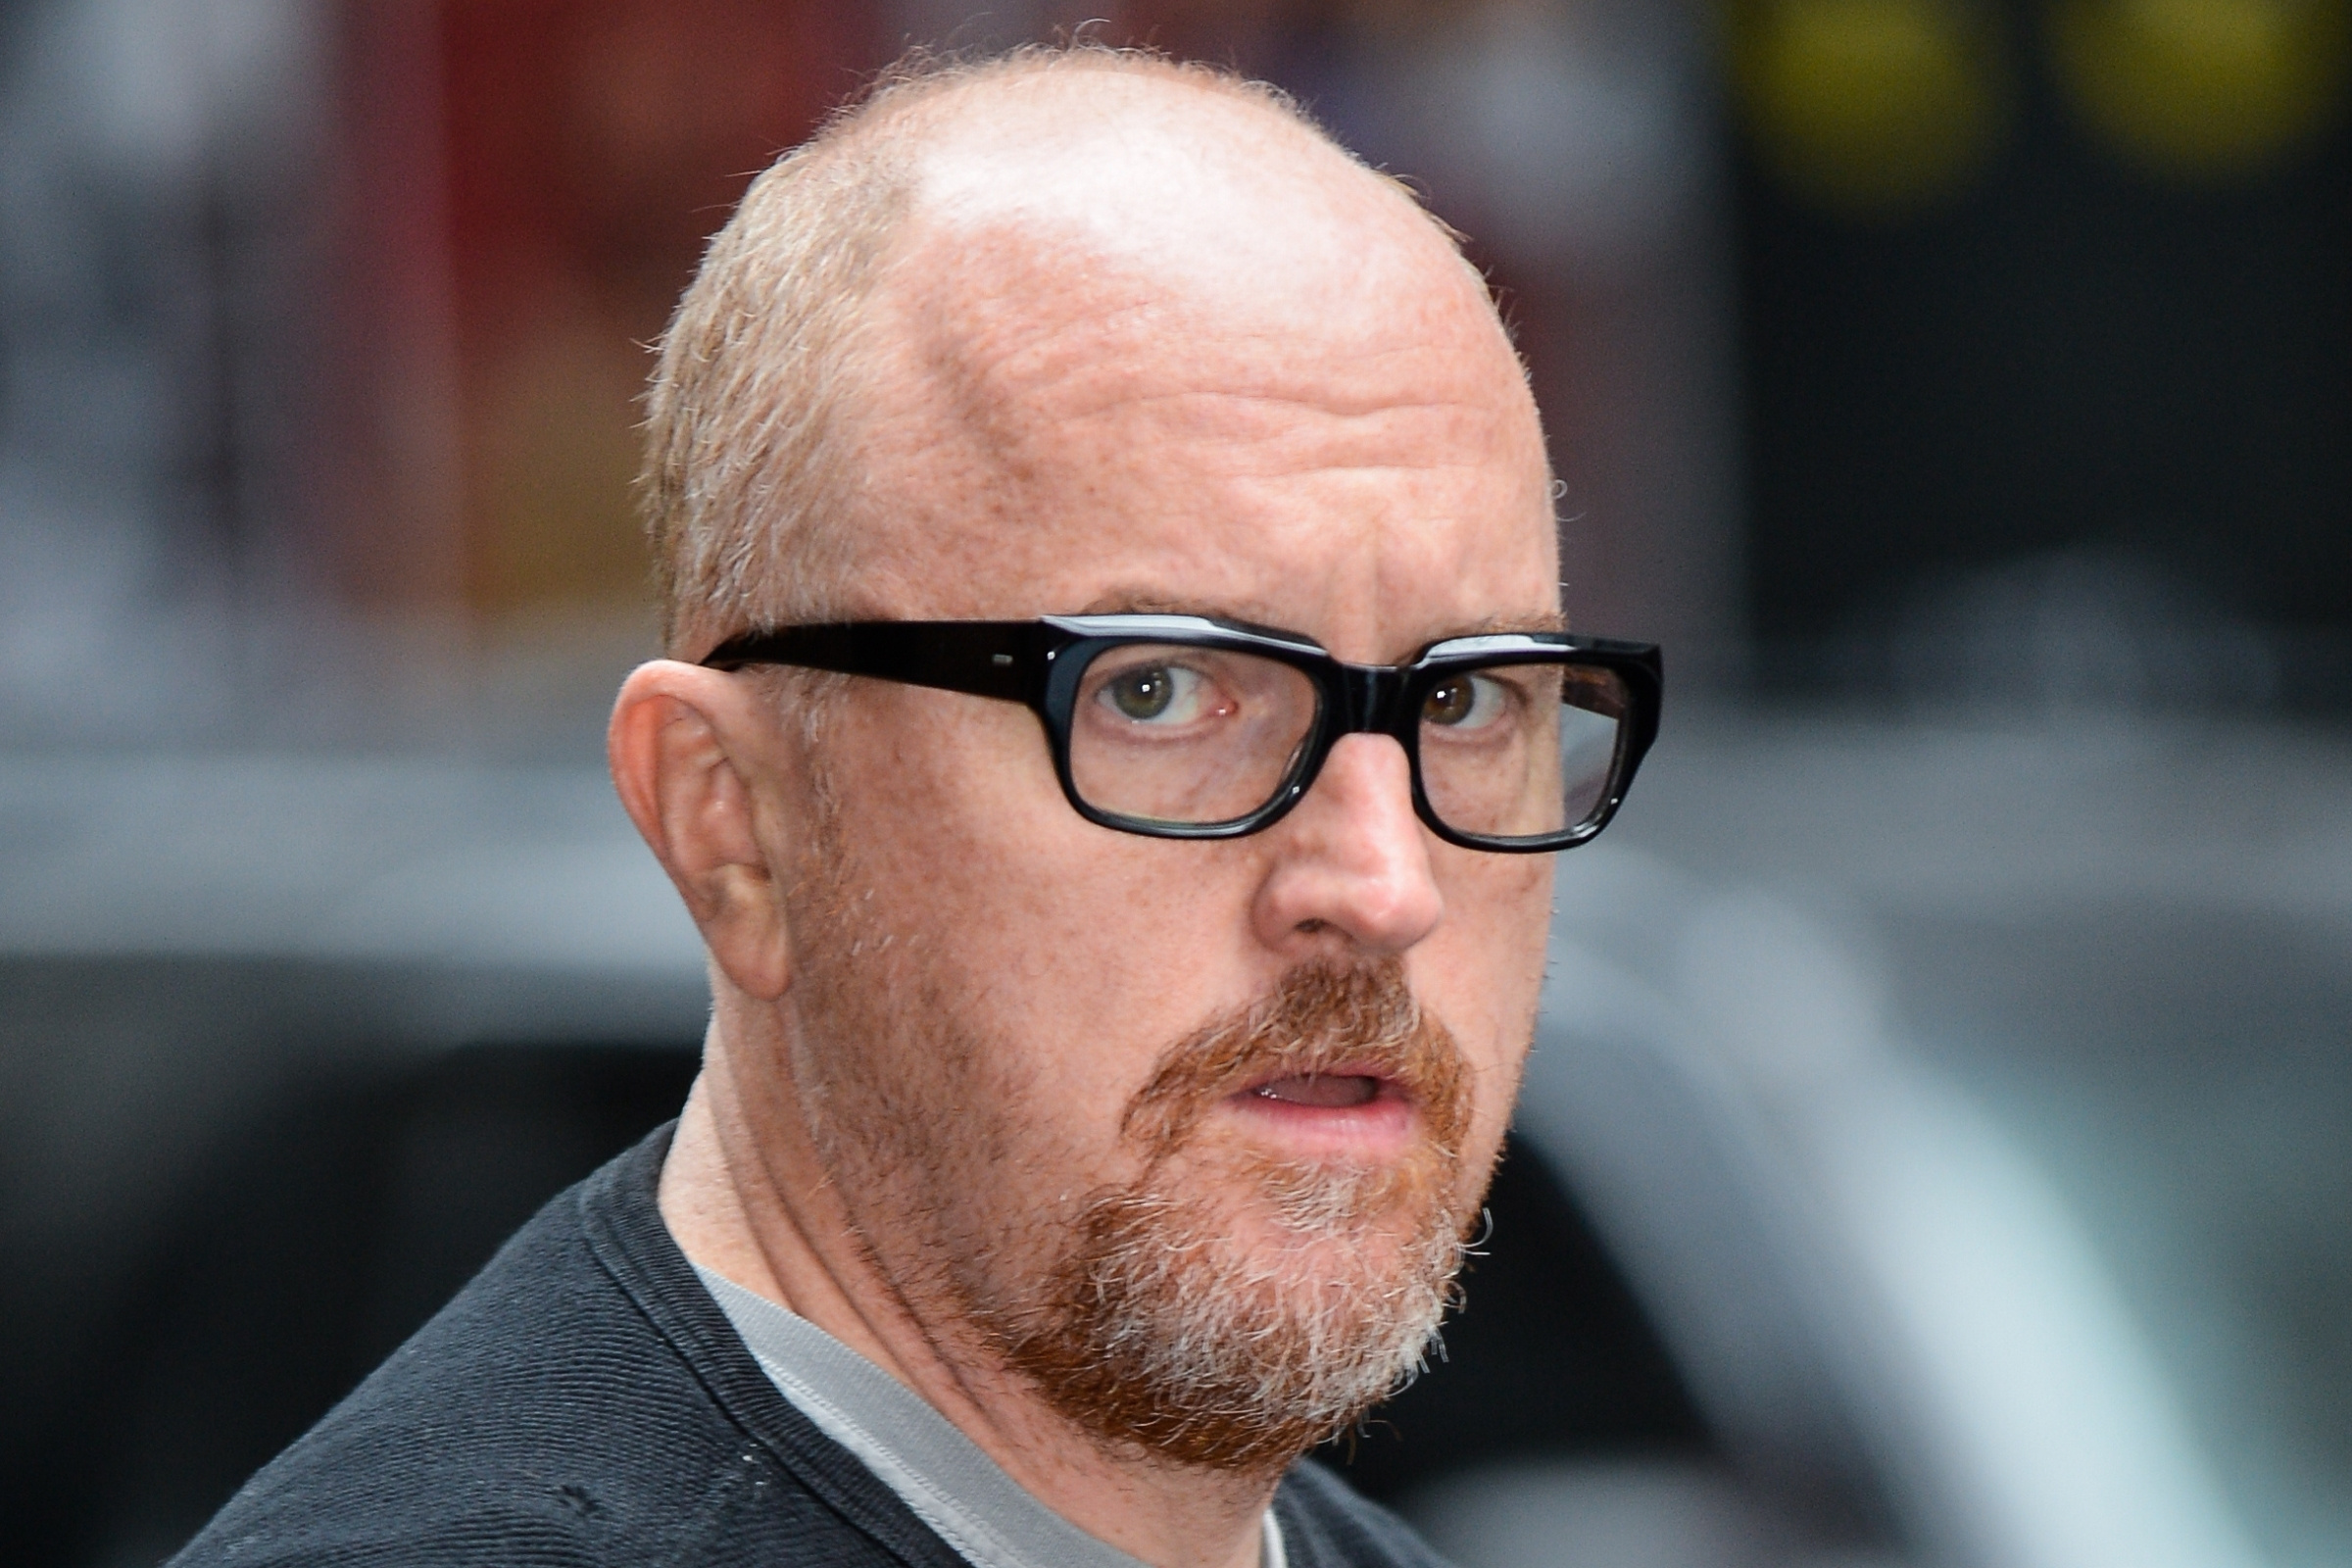 Fourth of July' Review: Louis C.K. Sidesteps His Scandal. Or Does He?